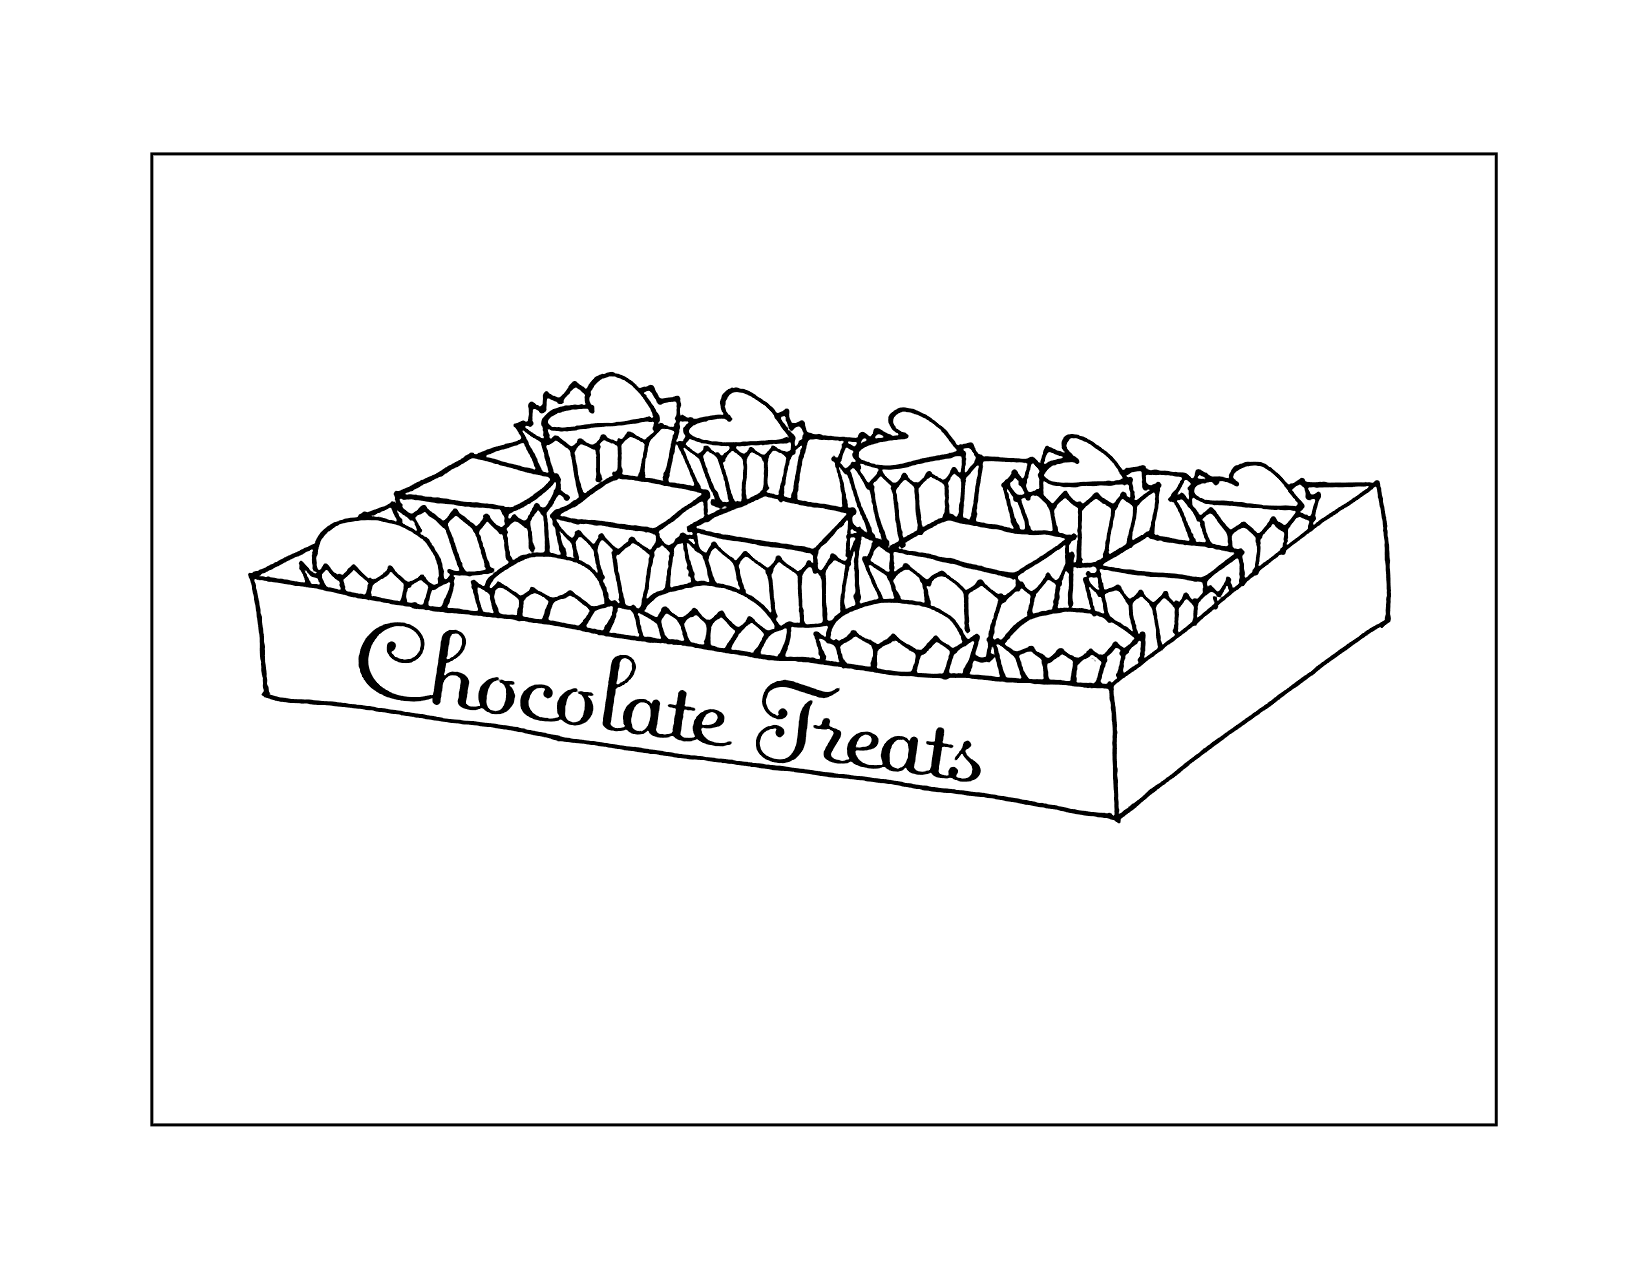 Chocolate Treats Coloring Page